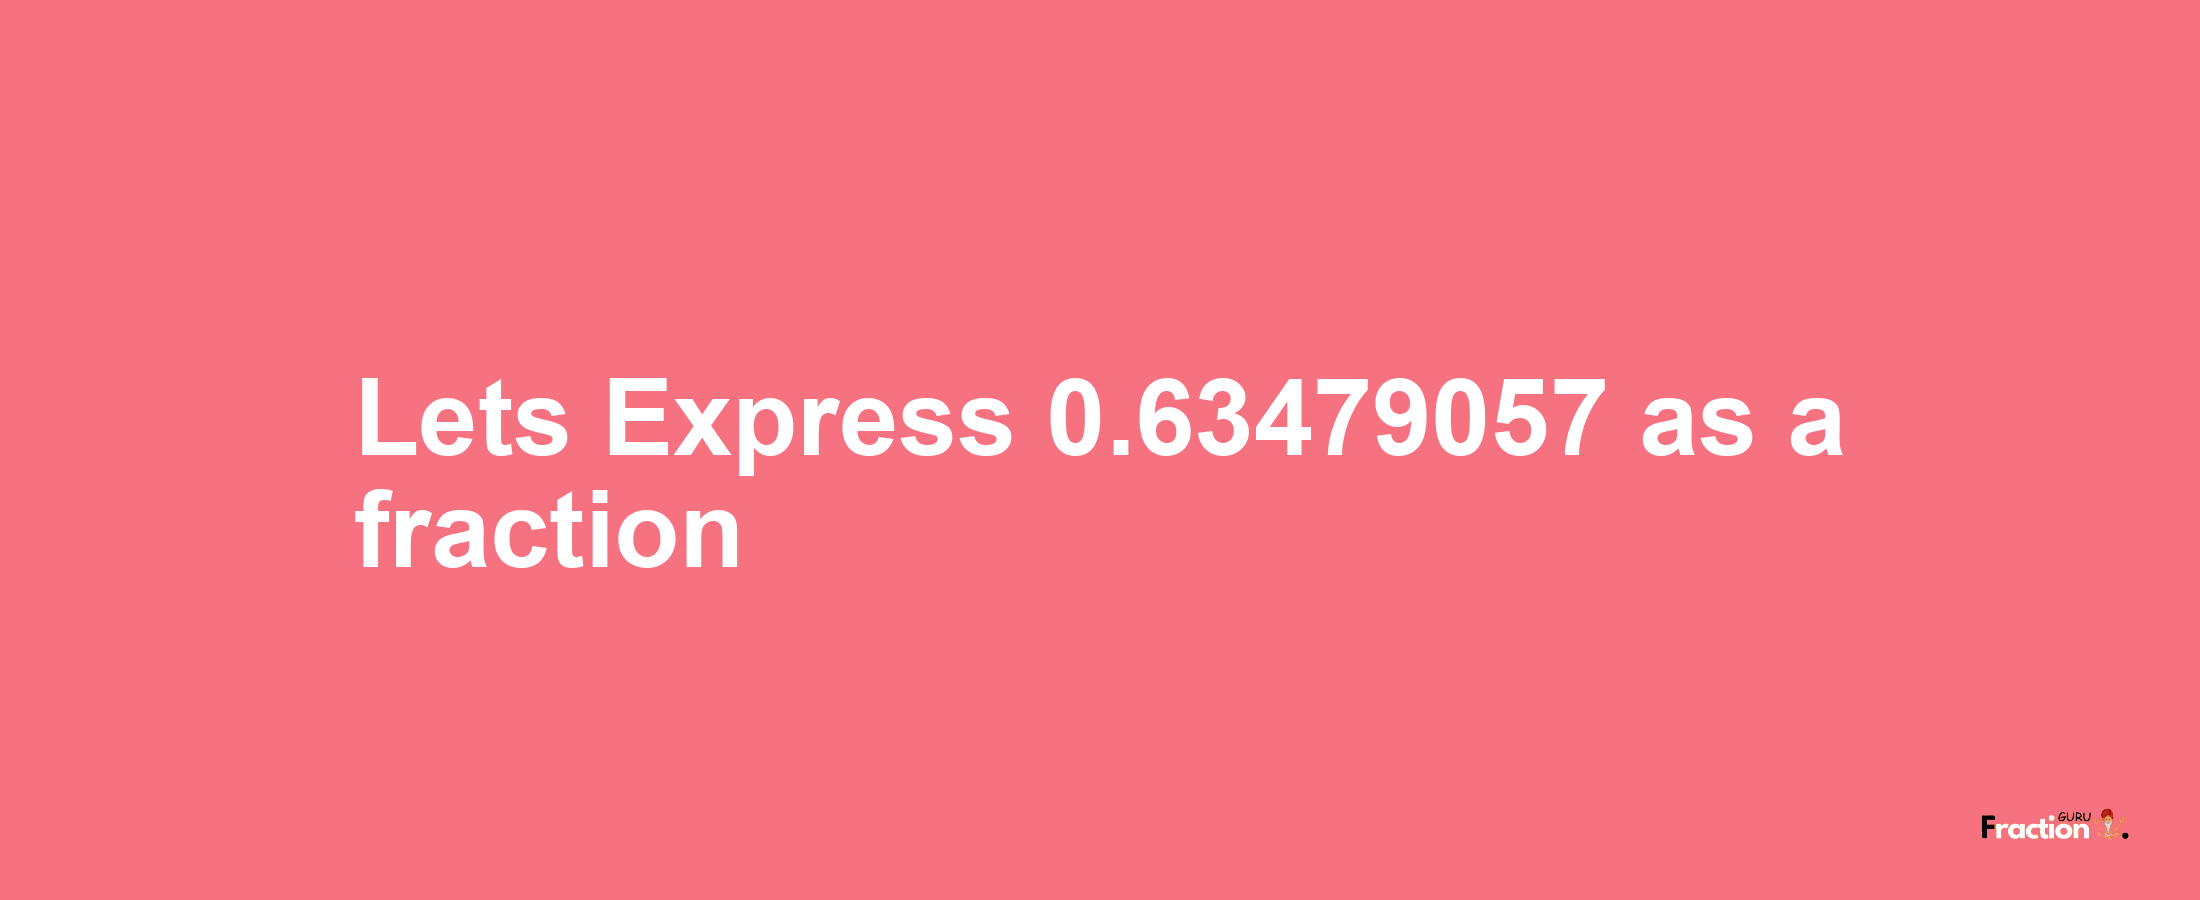 Lets Express 0.63479057 as afraction